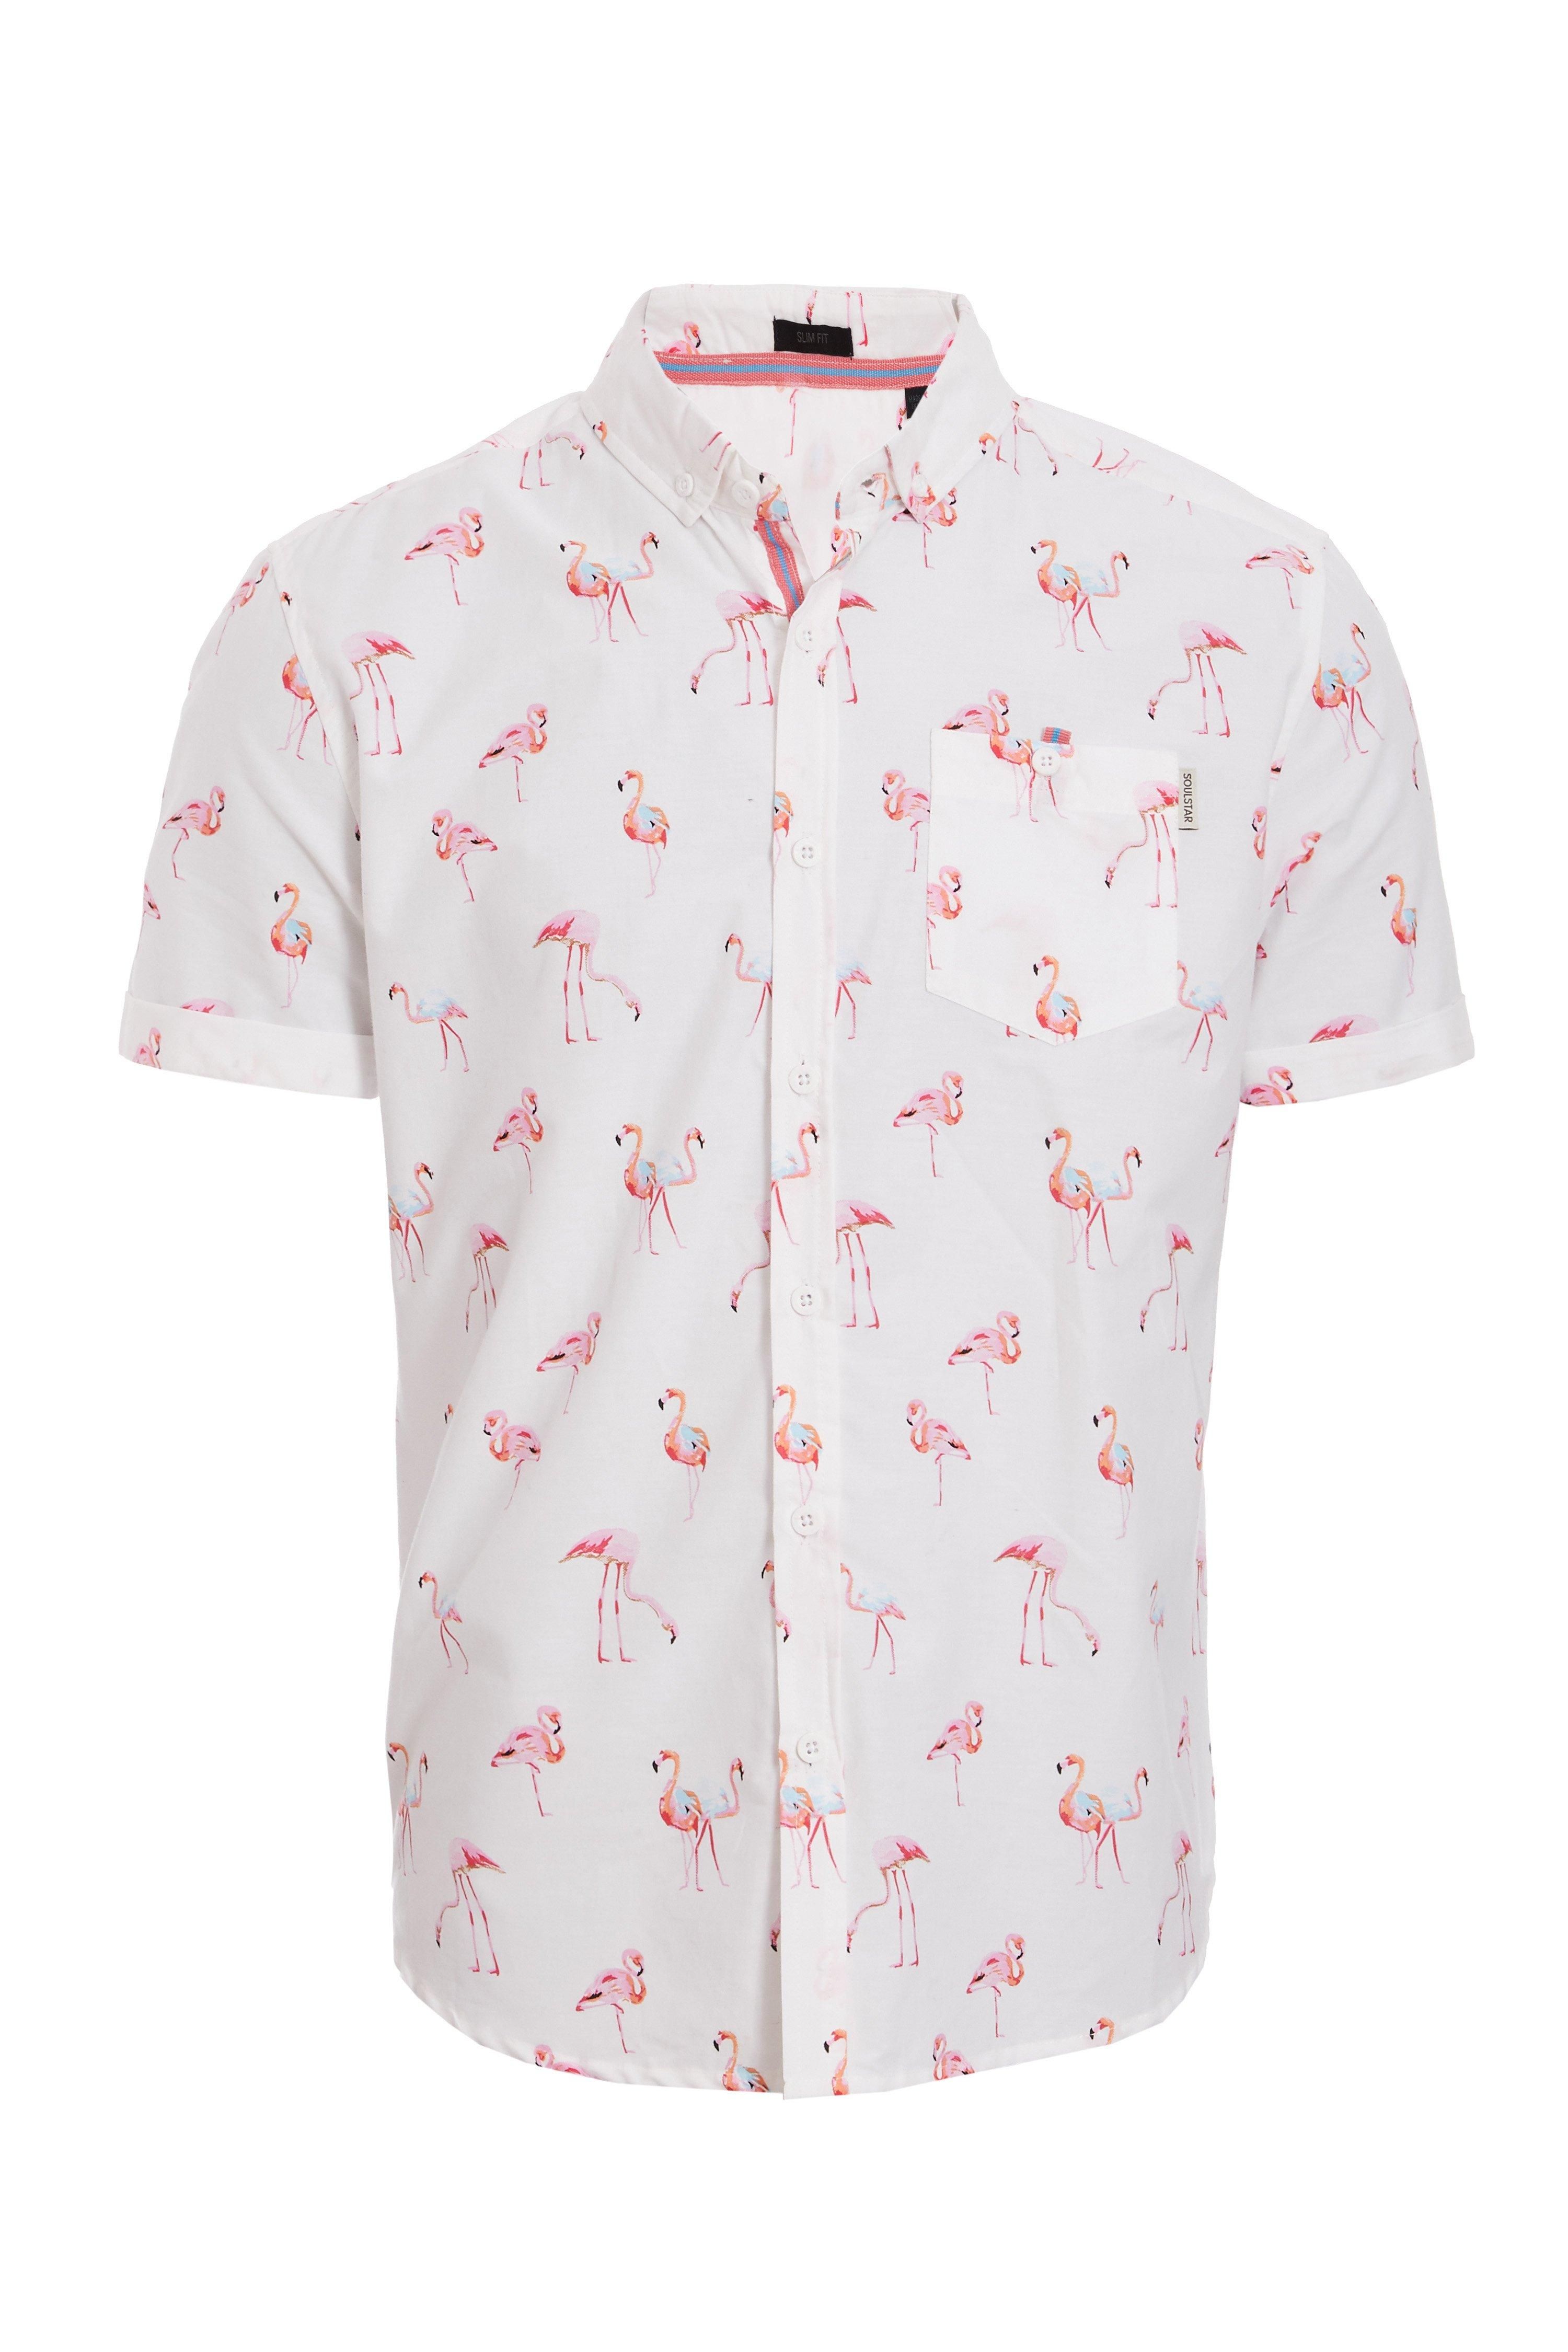 Slim Fit  	Classic Collar with Buttons  	Pink Flamingo Printed Design  	Short Sleeves  	White Buttob hrough Fastening  	Length 72cm